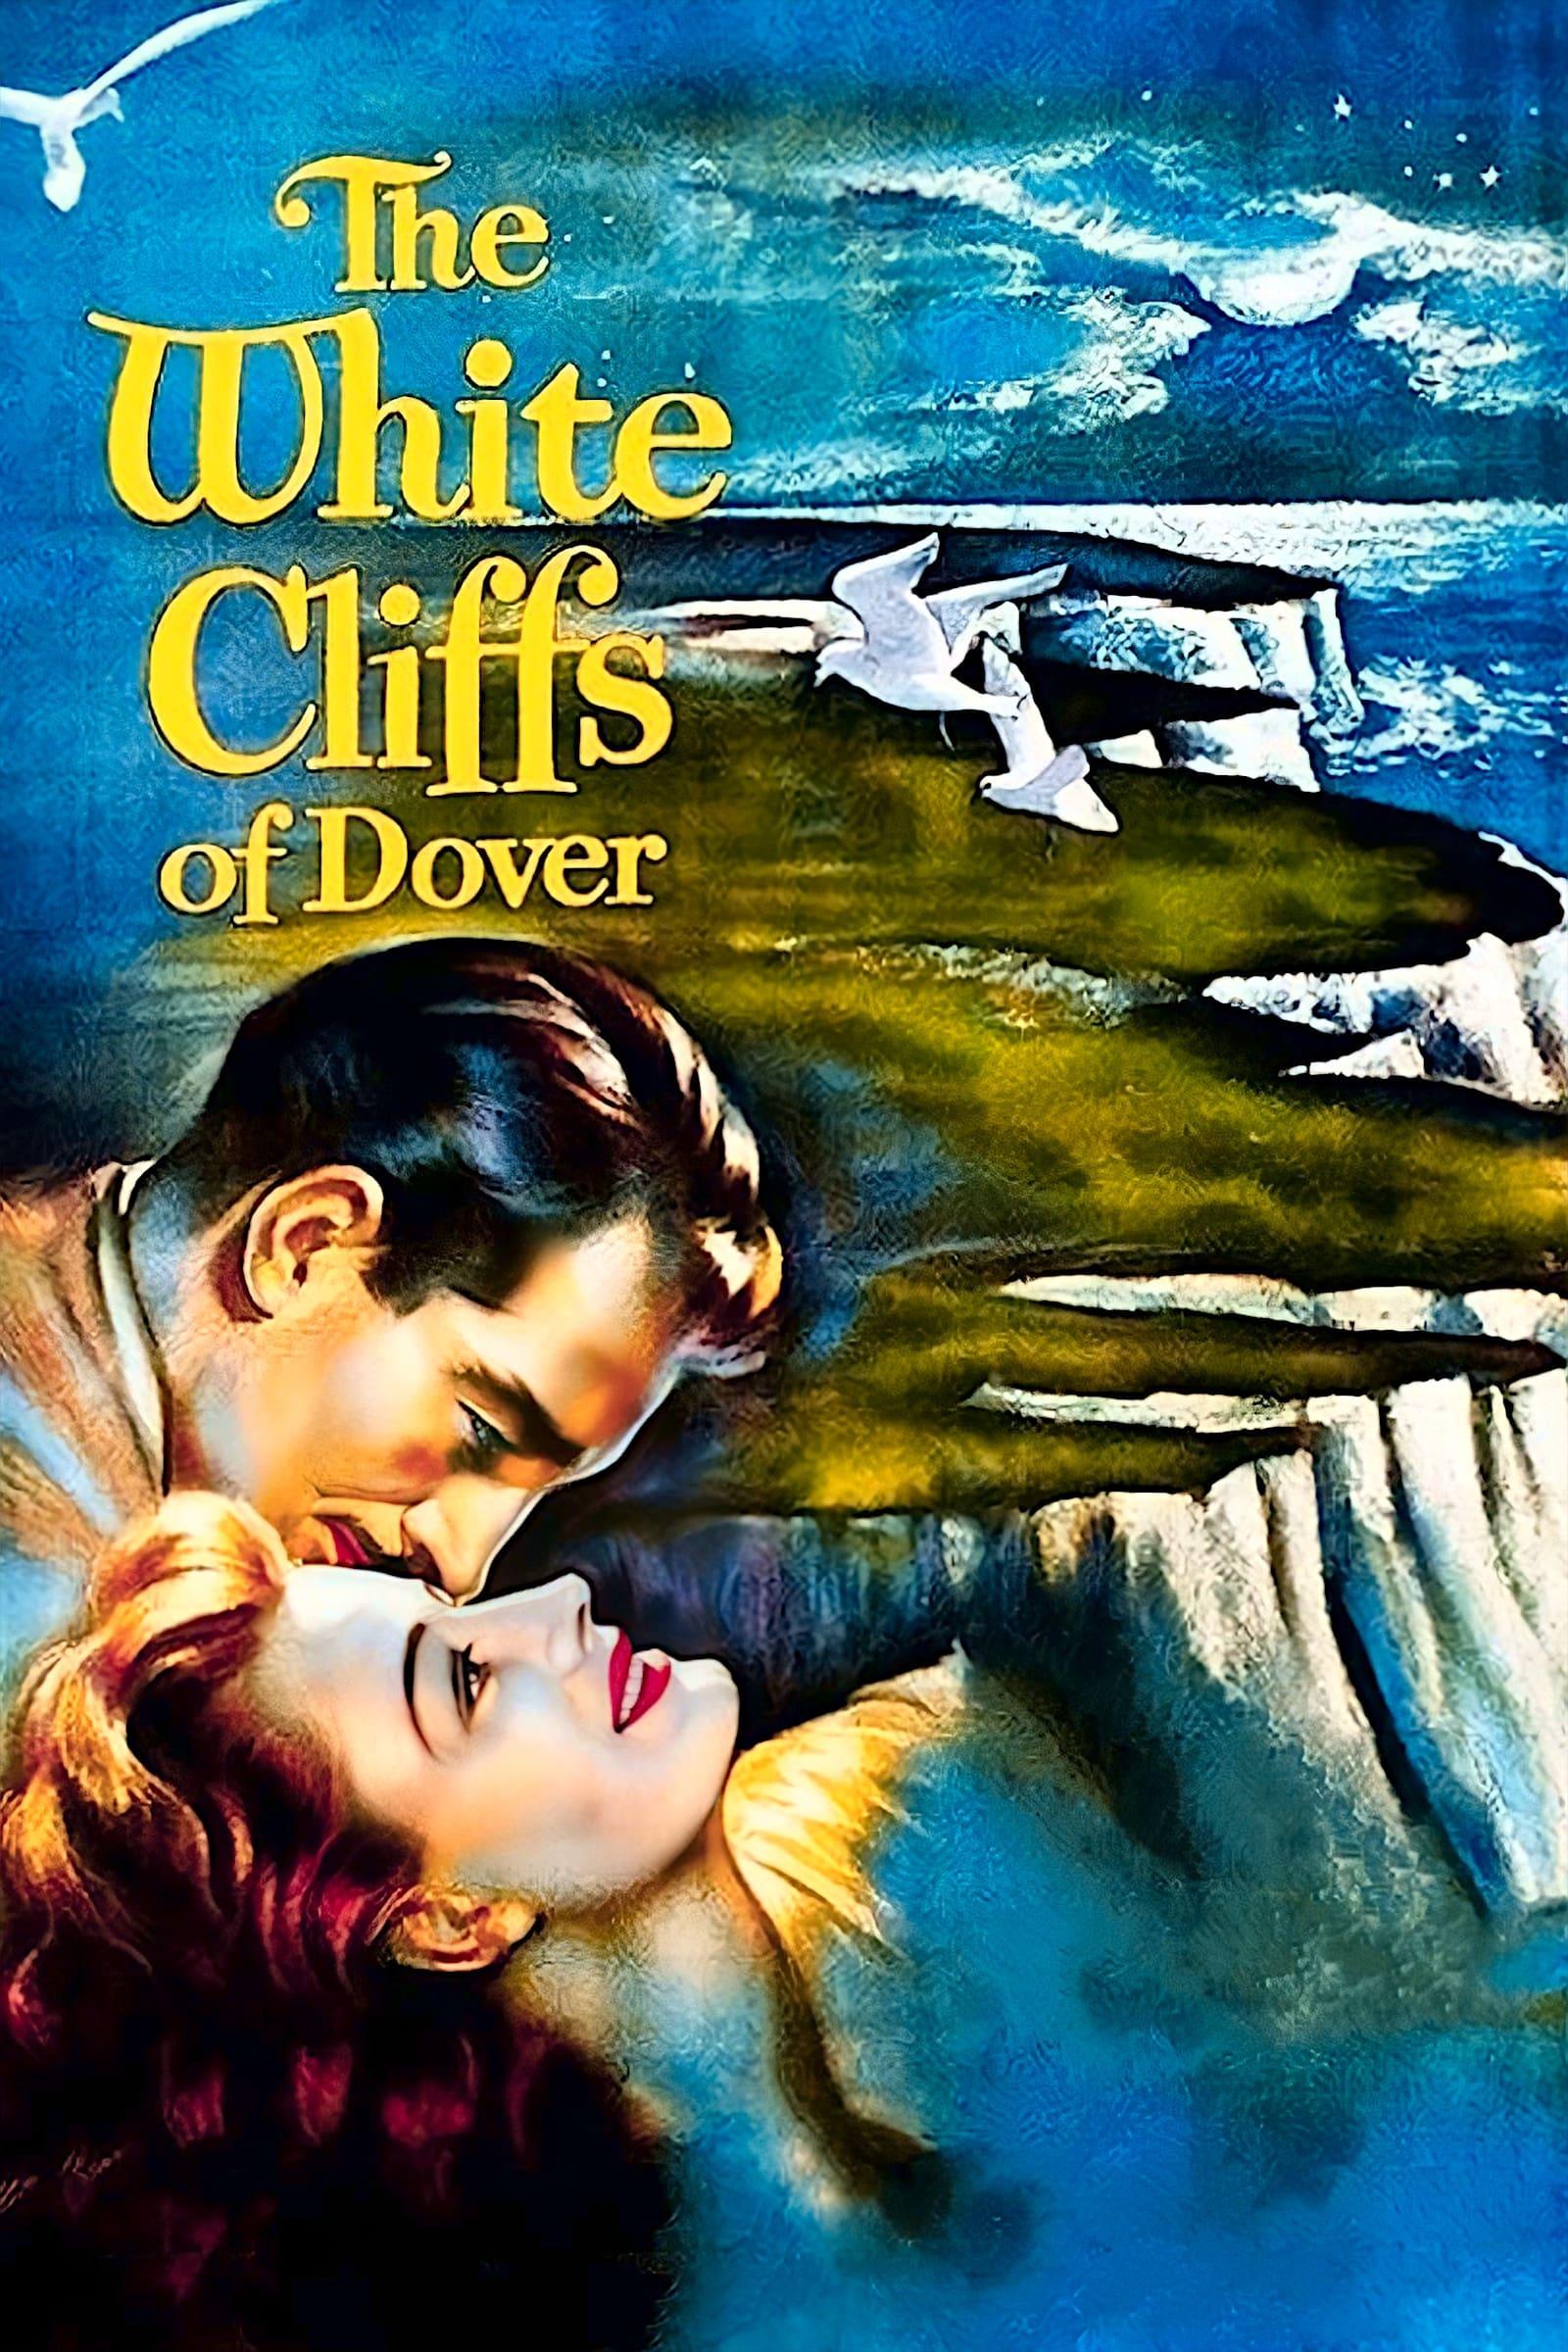 The White Cliffs of Dover poster